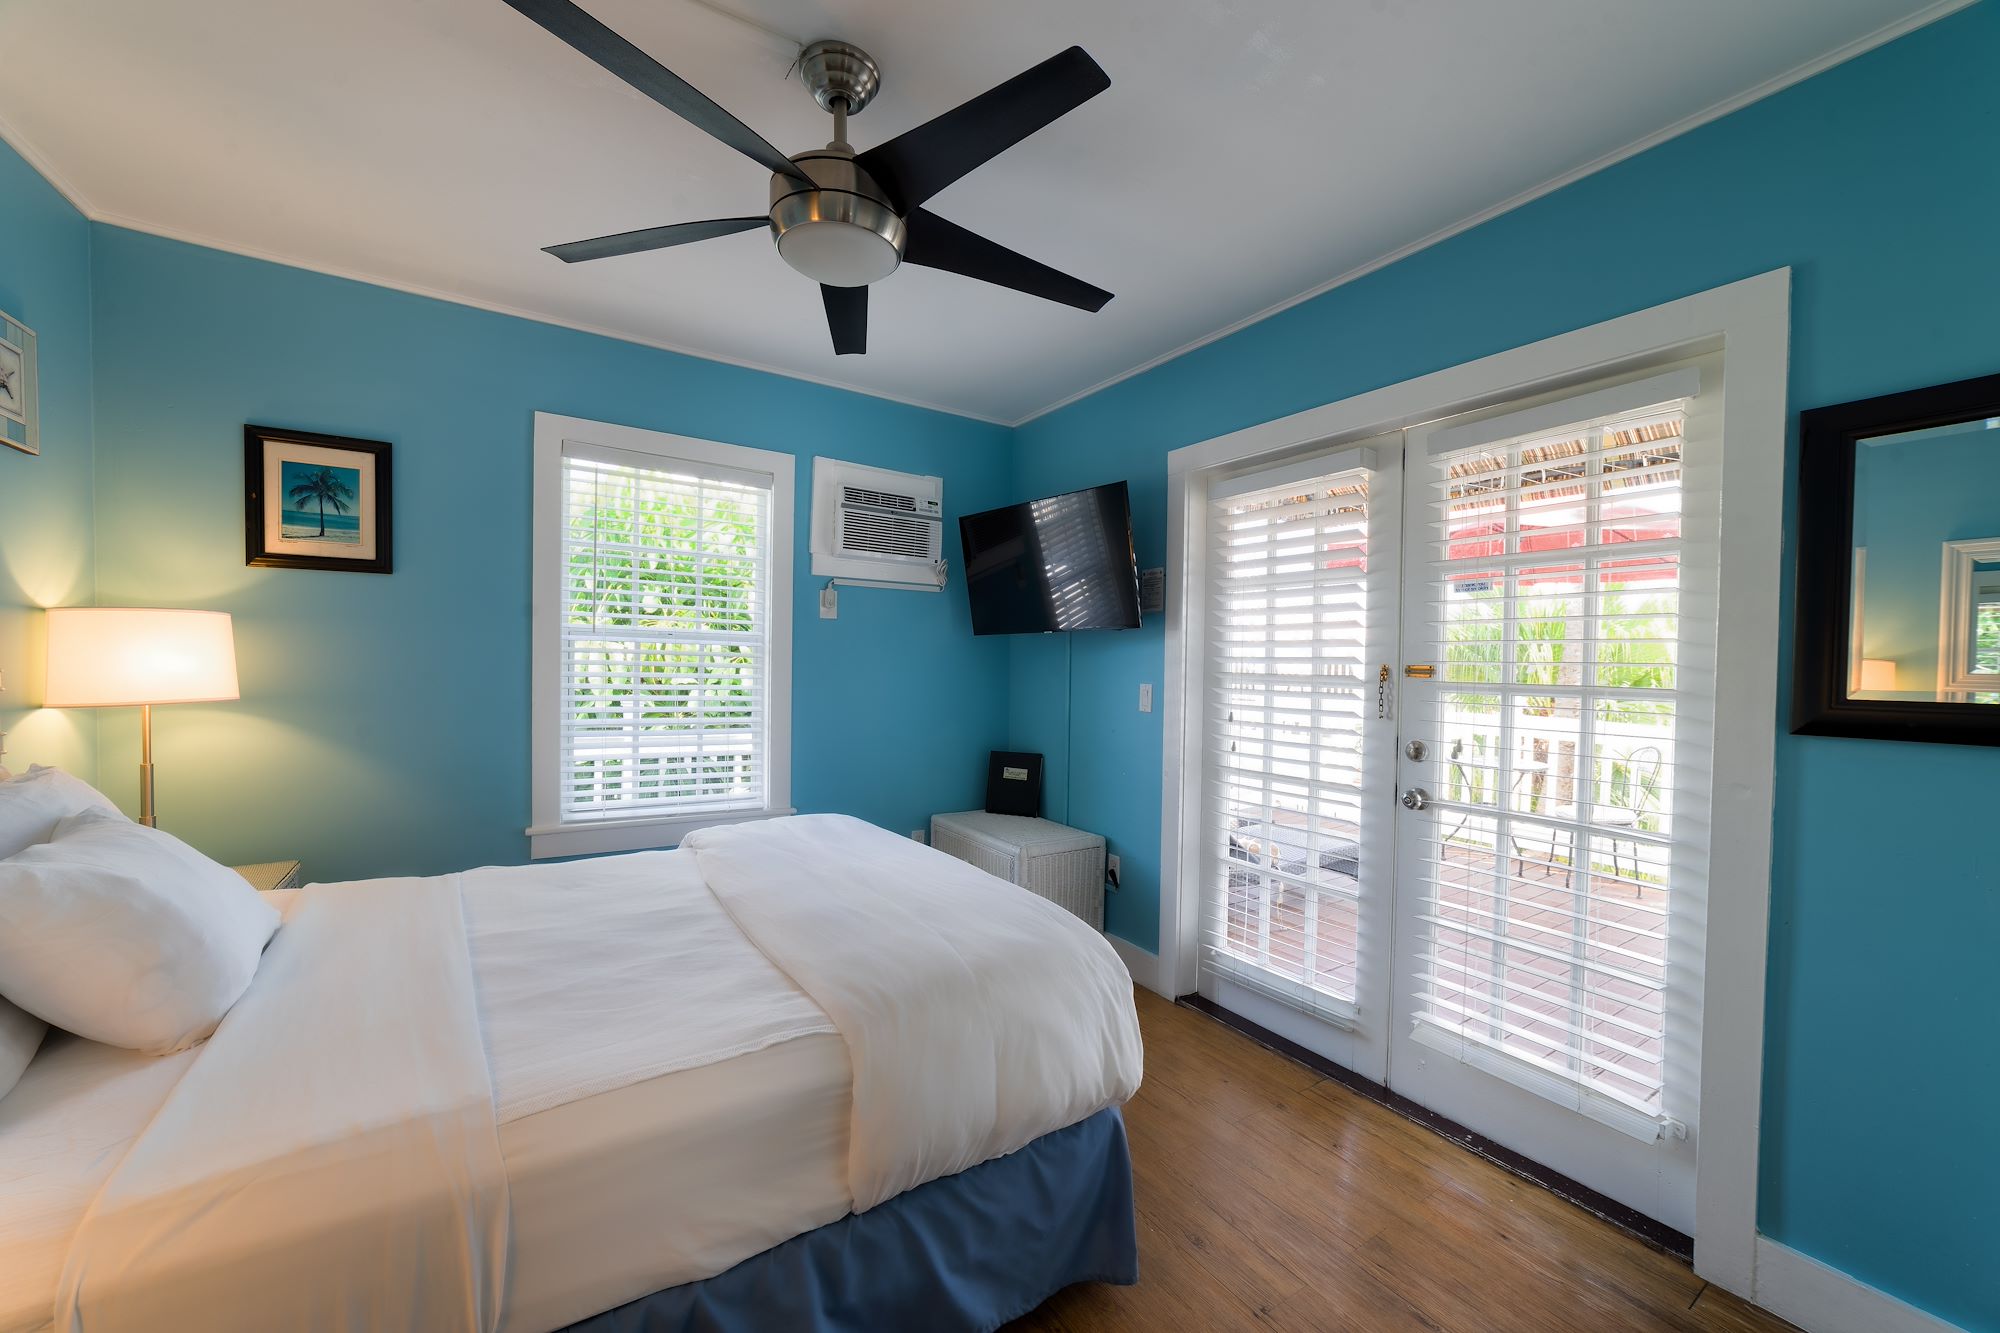 Our Key West Deluxe Queen Room with Patio